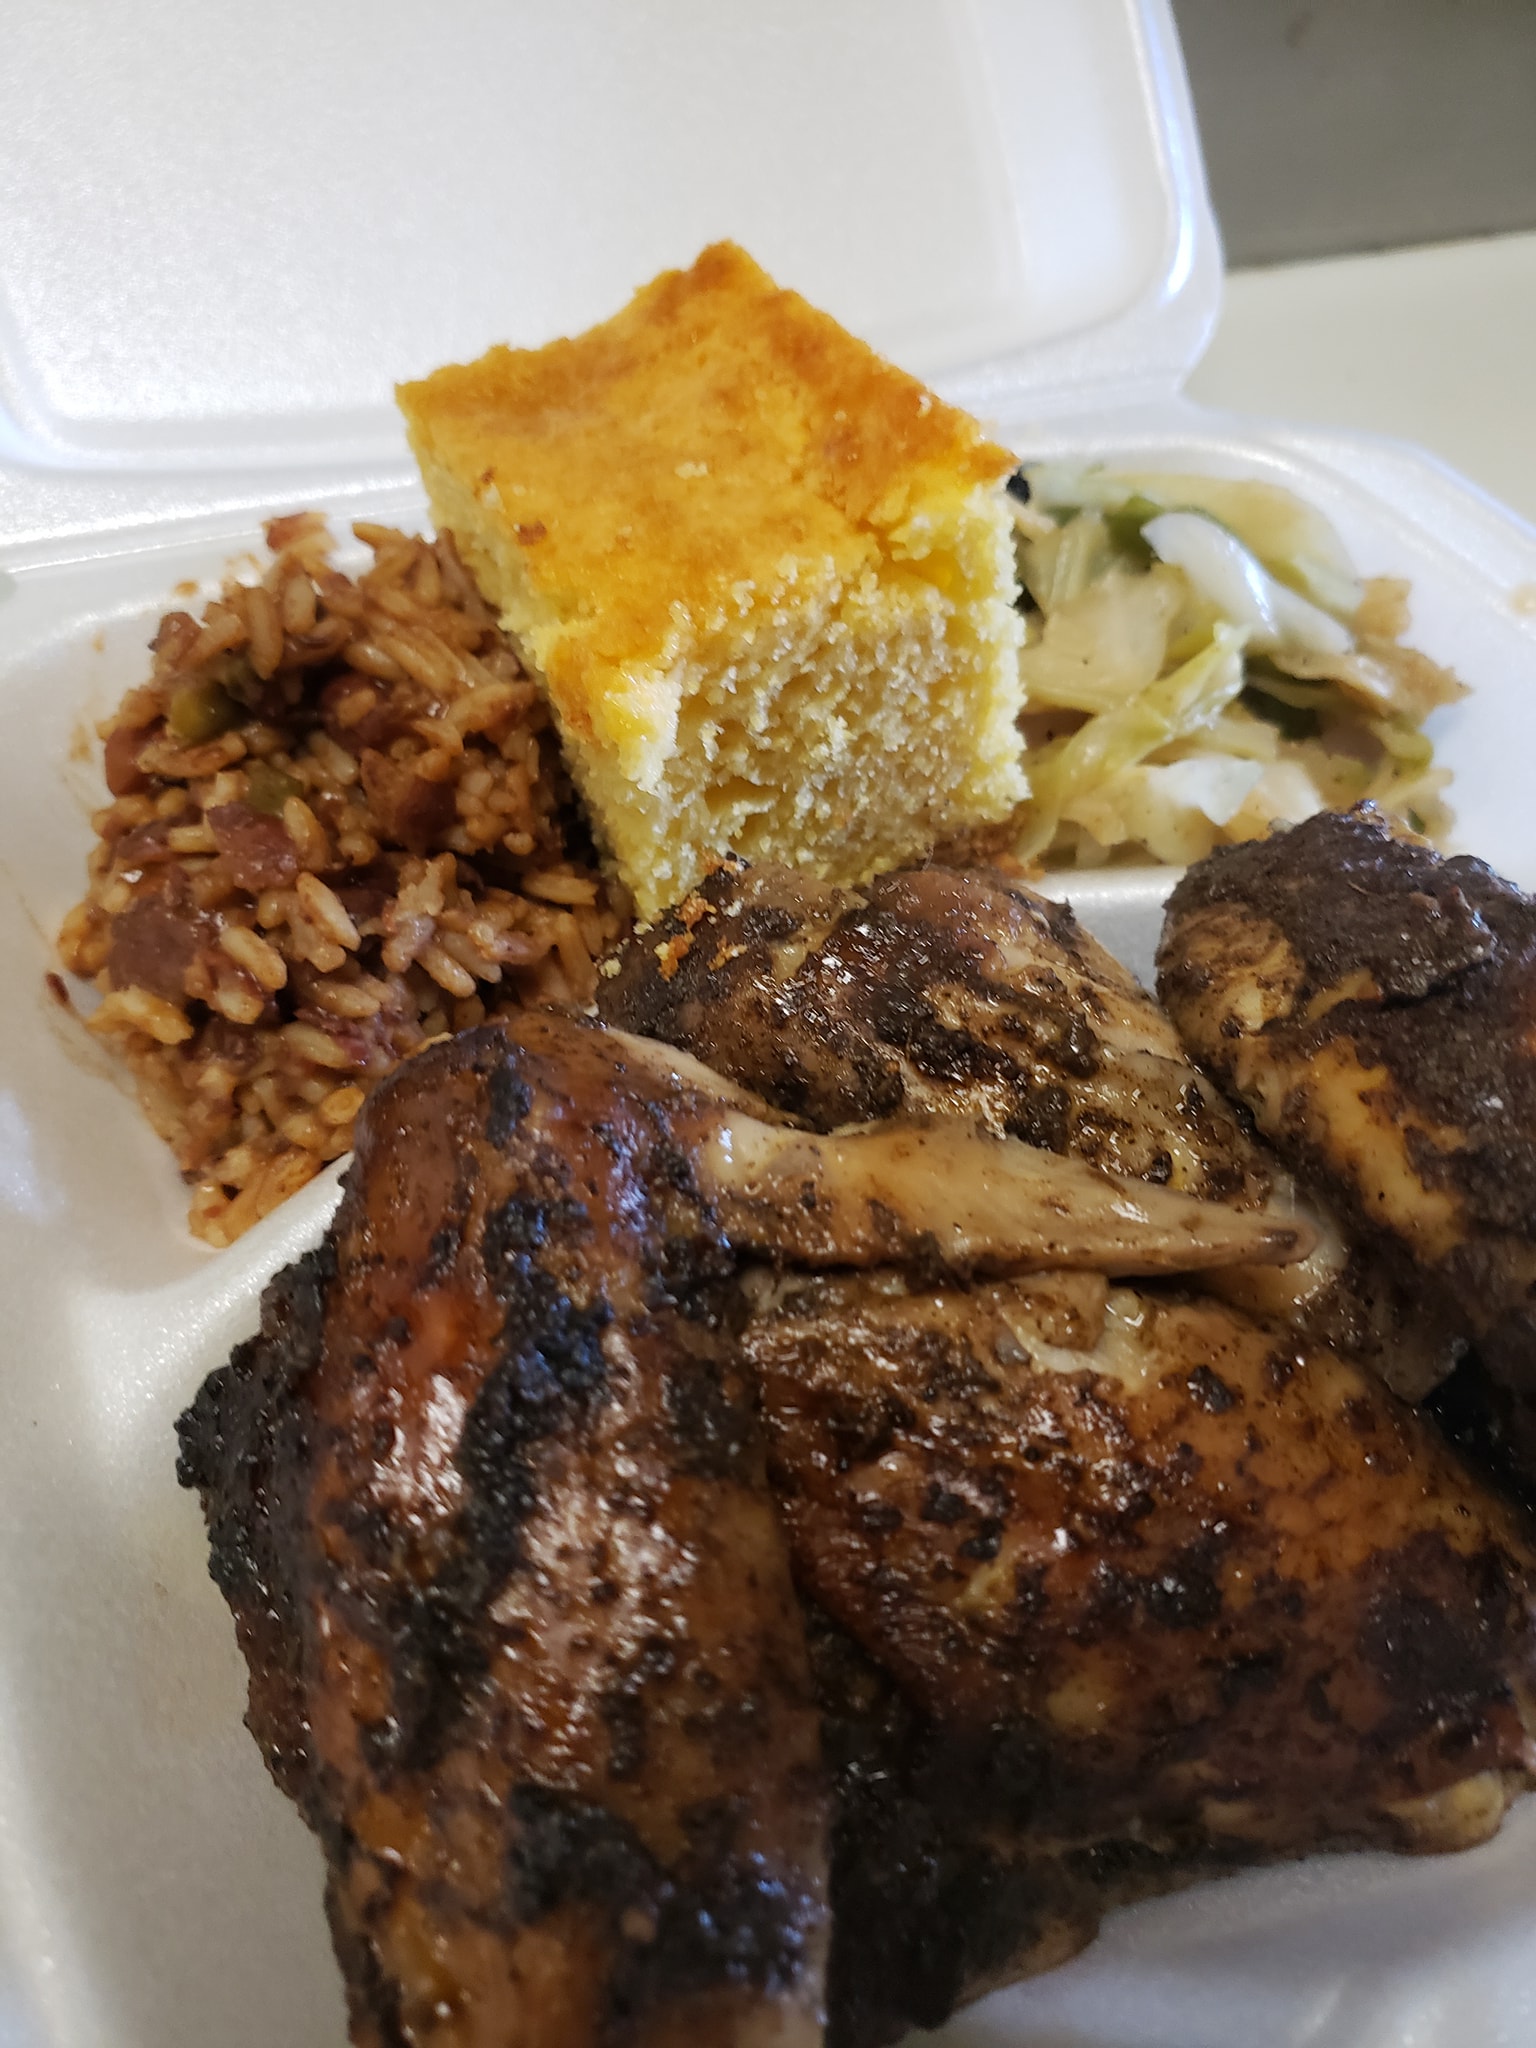 Seasoned chicken with two sides sits in a divided styrofoam container. Photo from Dis N' Dat BBQ Facebook page.